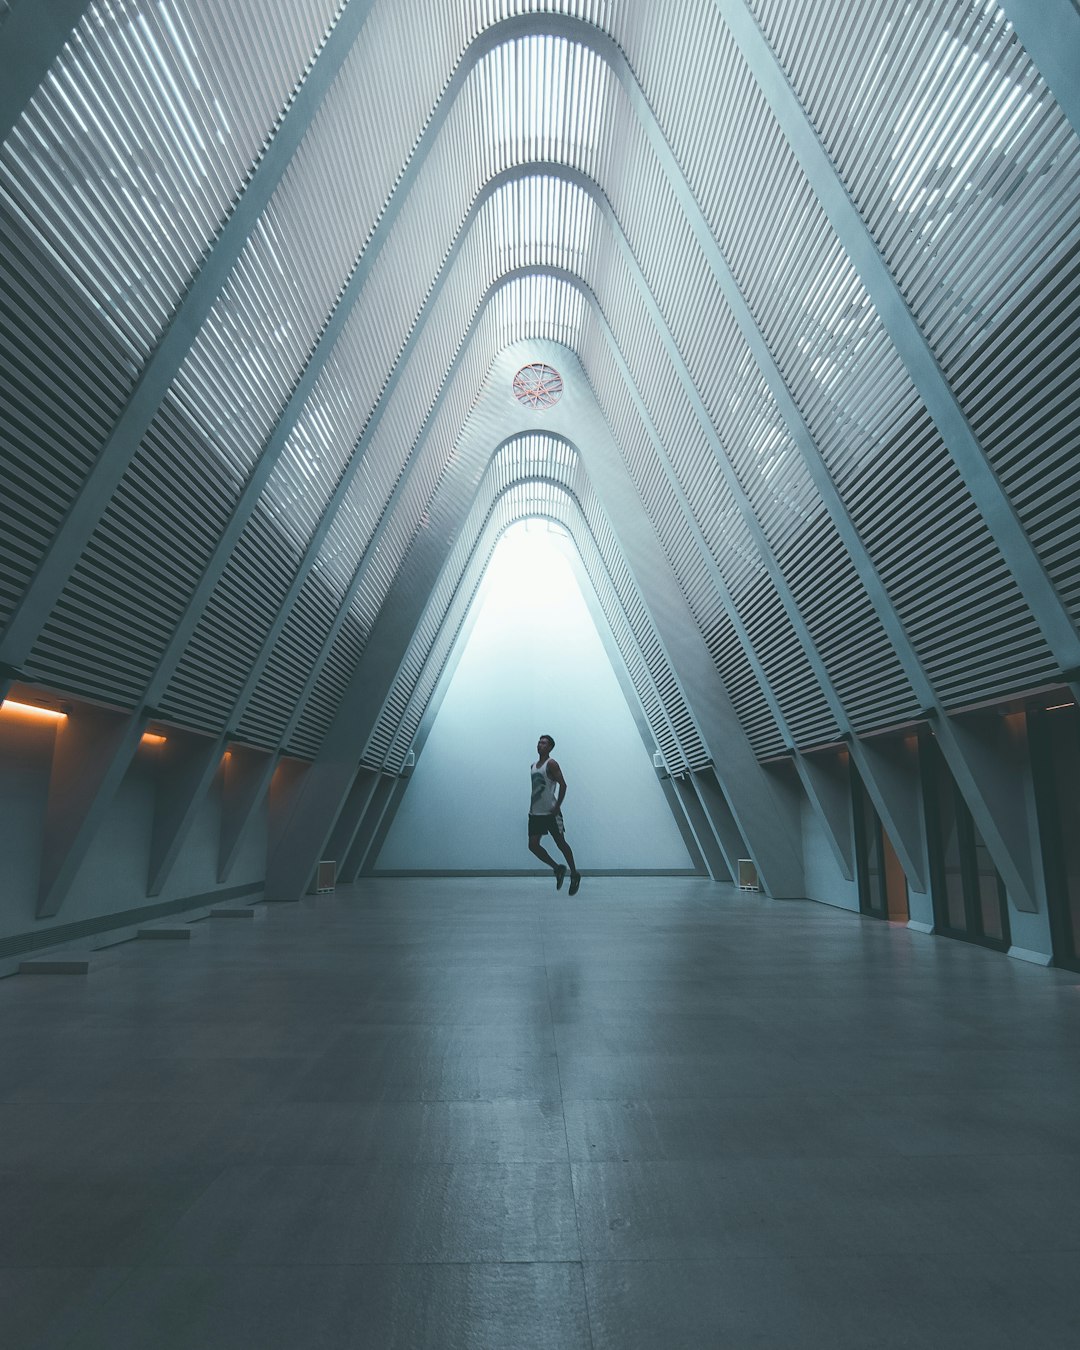 A person is running in the center of an architectural structure, a huge white futuristic building with triangular structures. A soft light illuminates it from above and fog fills part of its interior space. The photo was taken in the style of Sony Alpha A7 III camera with a wideangle lens. It has a cinematic quality and high resolution.